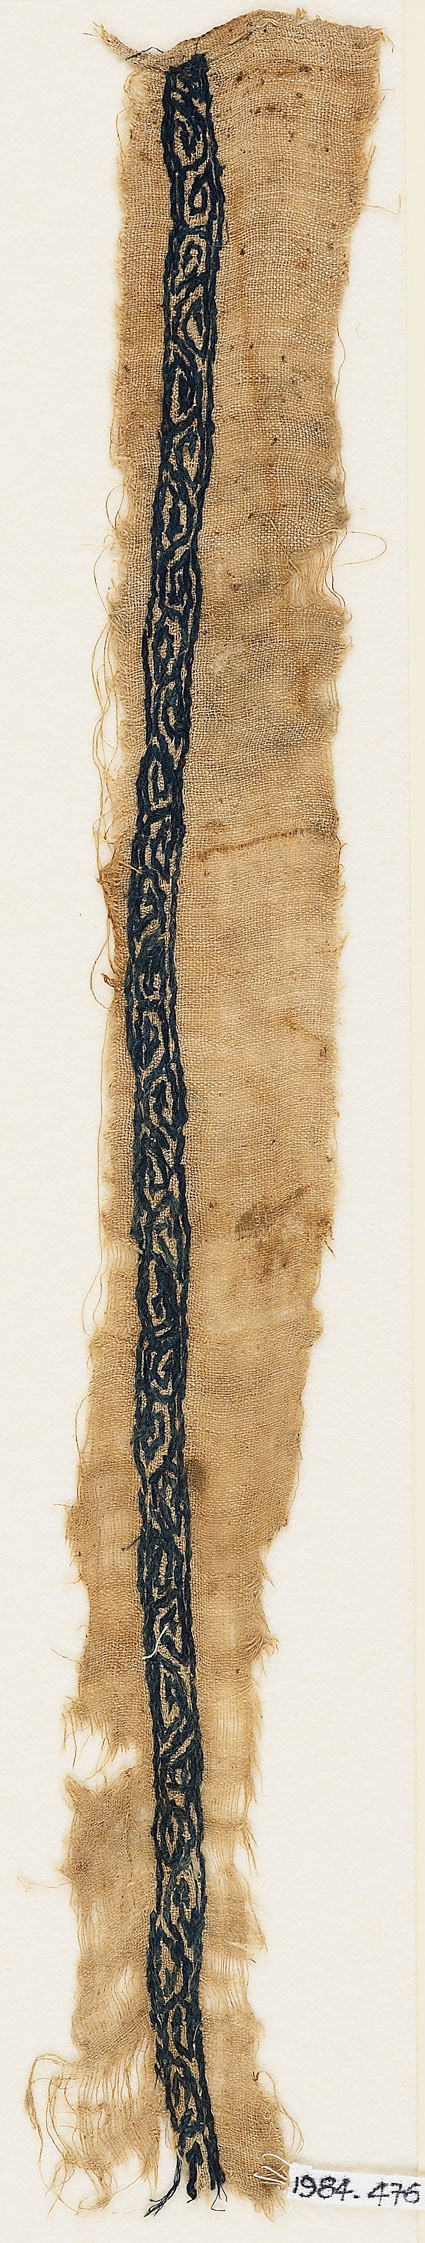 Textile fragment with vines and leavesfront